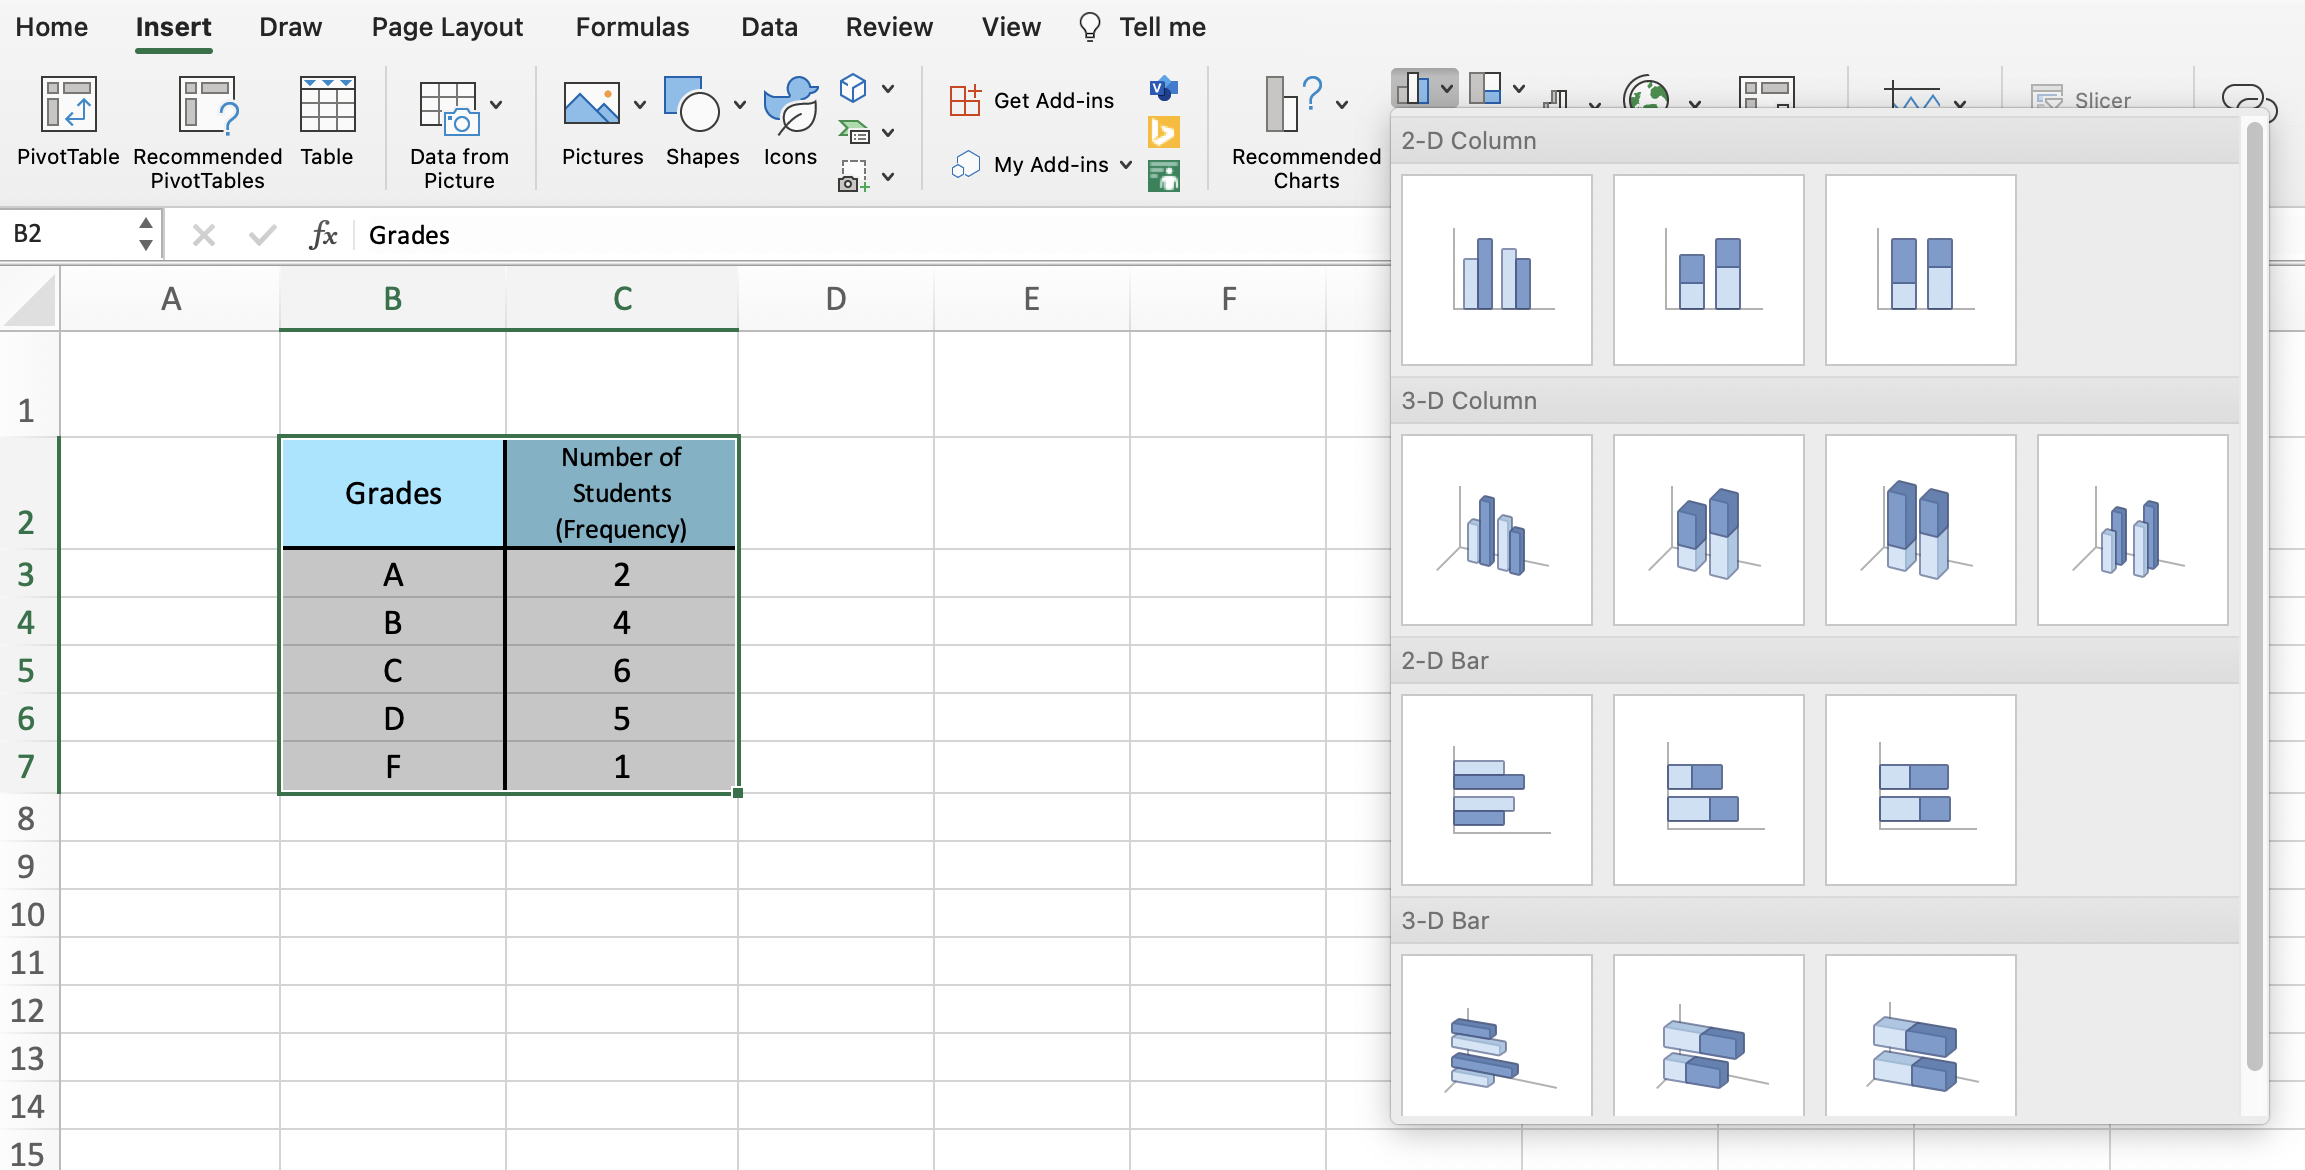 Spreadsheet in Excel presenting alternative bar charts for grades